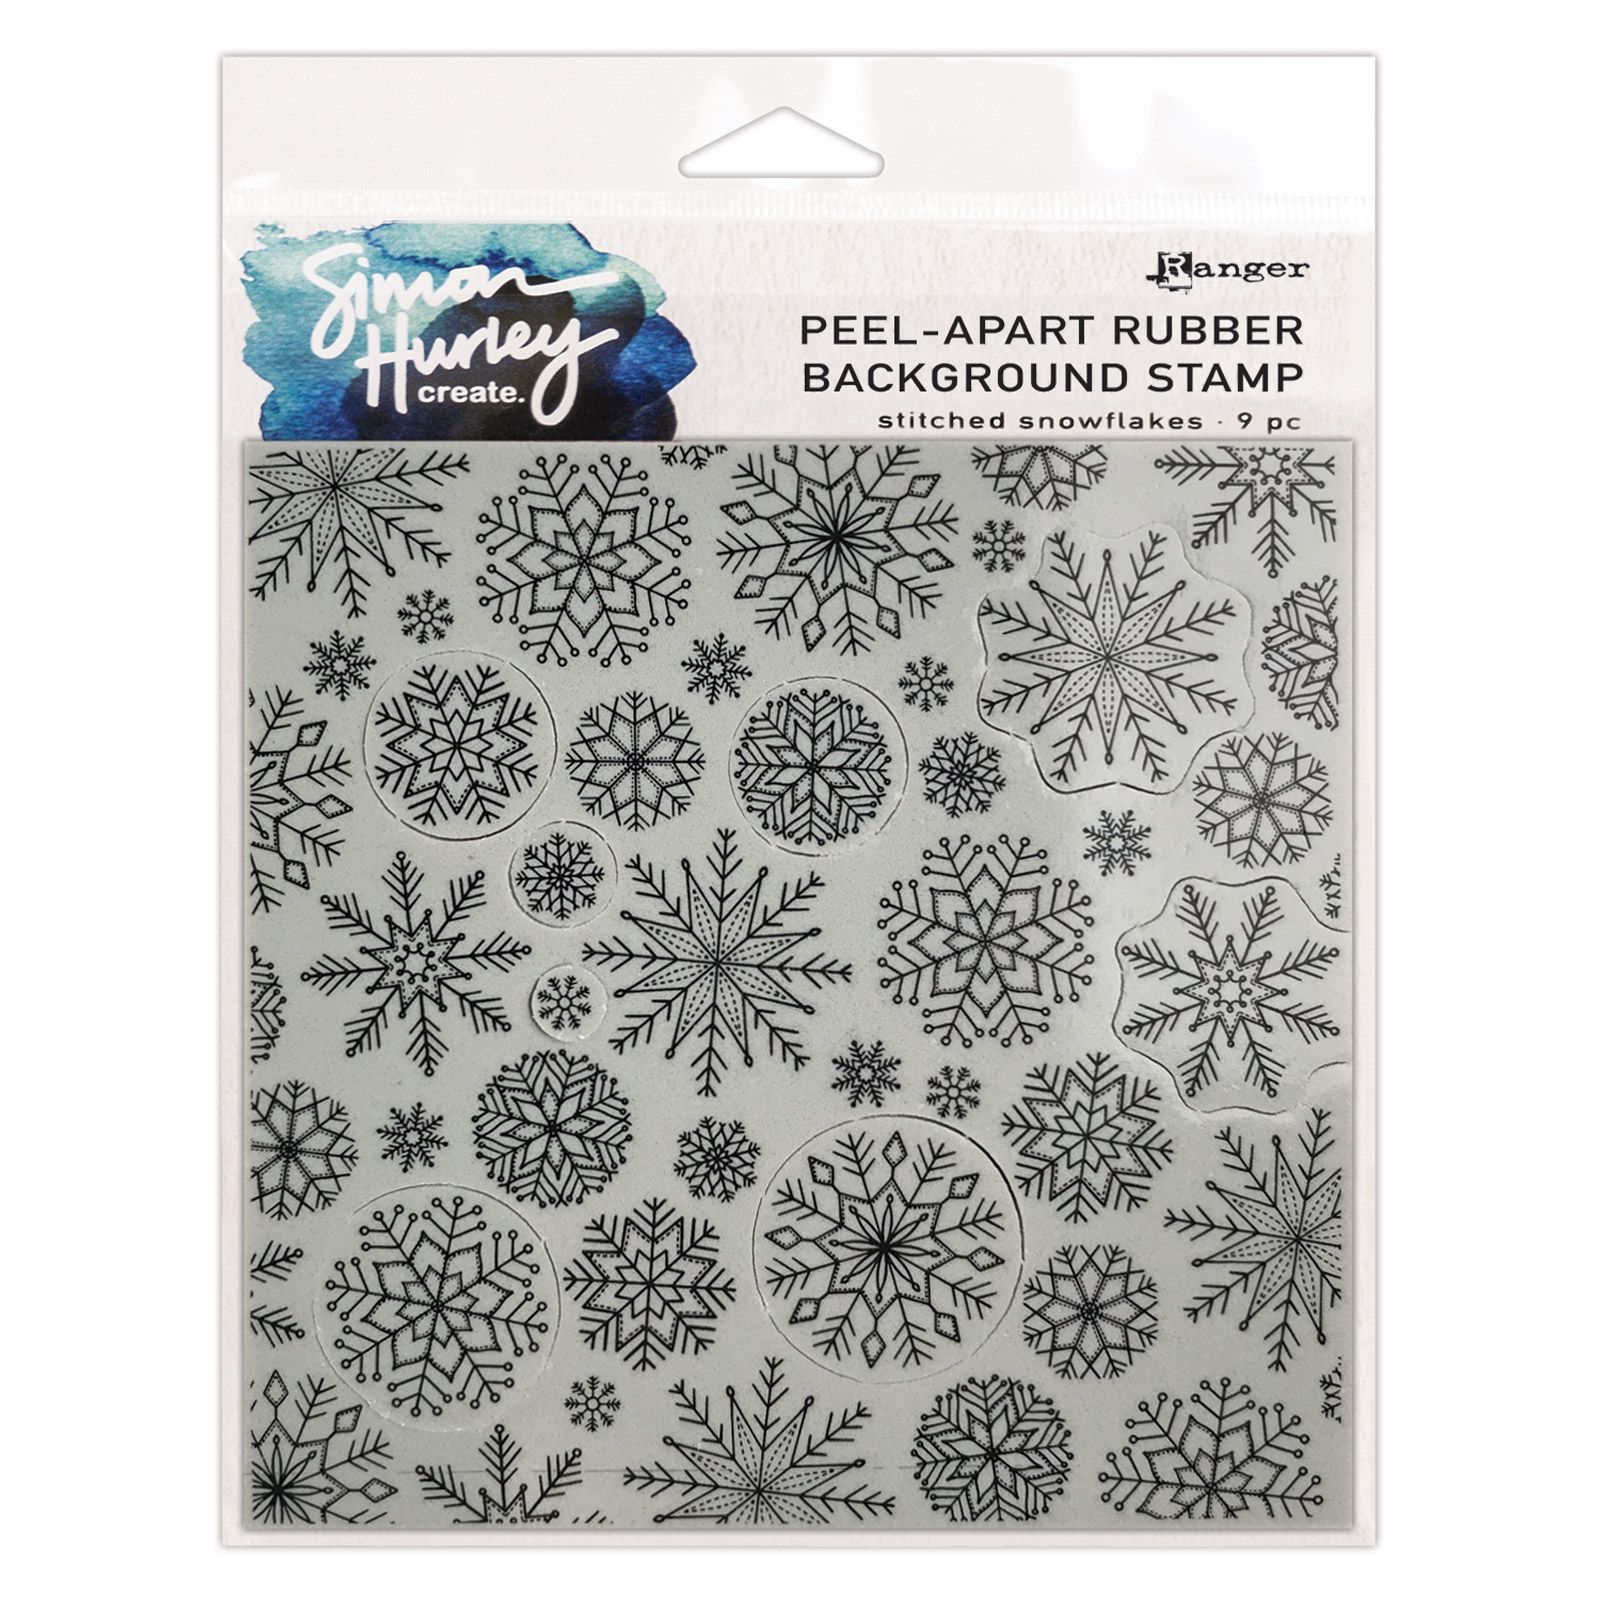 Ranger • Simon Hurley create background stamps Stitched snowflakes